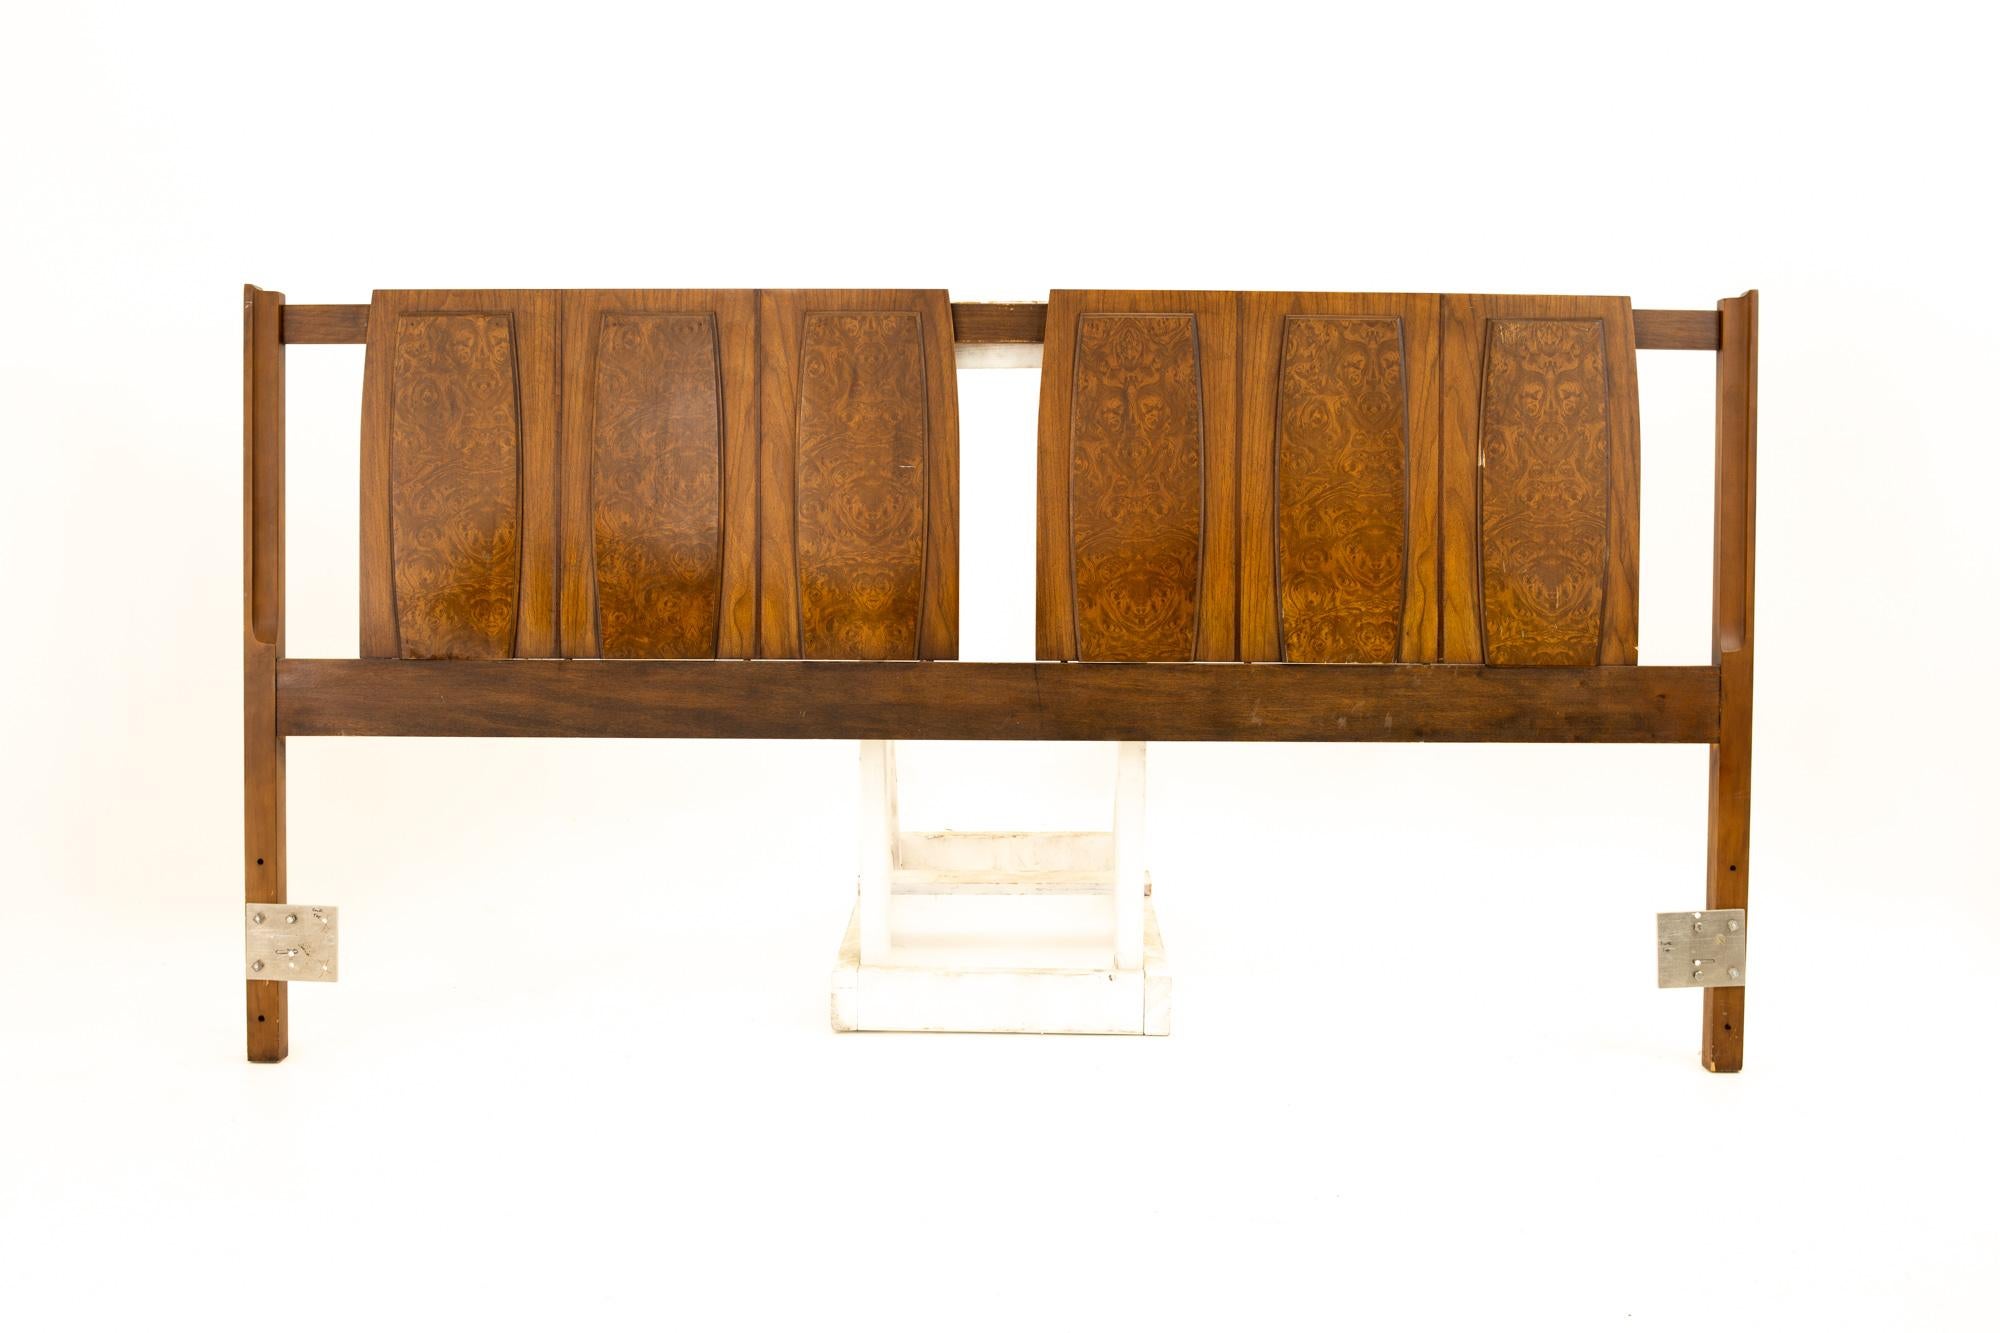 Lenoir House Mid Century burl wood and walnut king headboard
Head board measures: 78.5 wide x 1.5 deep x 40.75 high

All pieces of furniture can be had in what we call restored vintage condition. That means the piece is restored upon purchase so